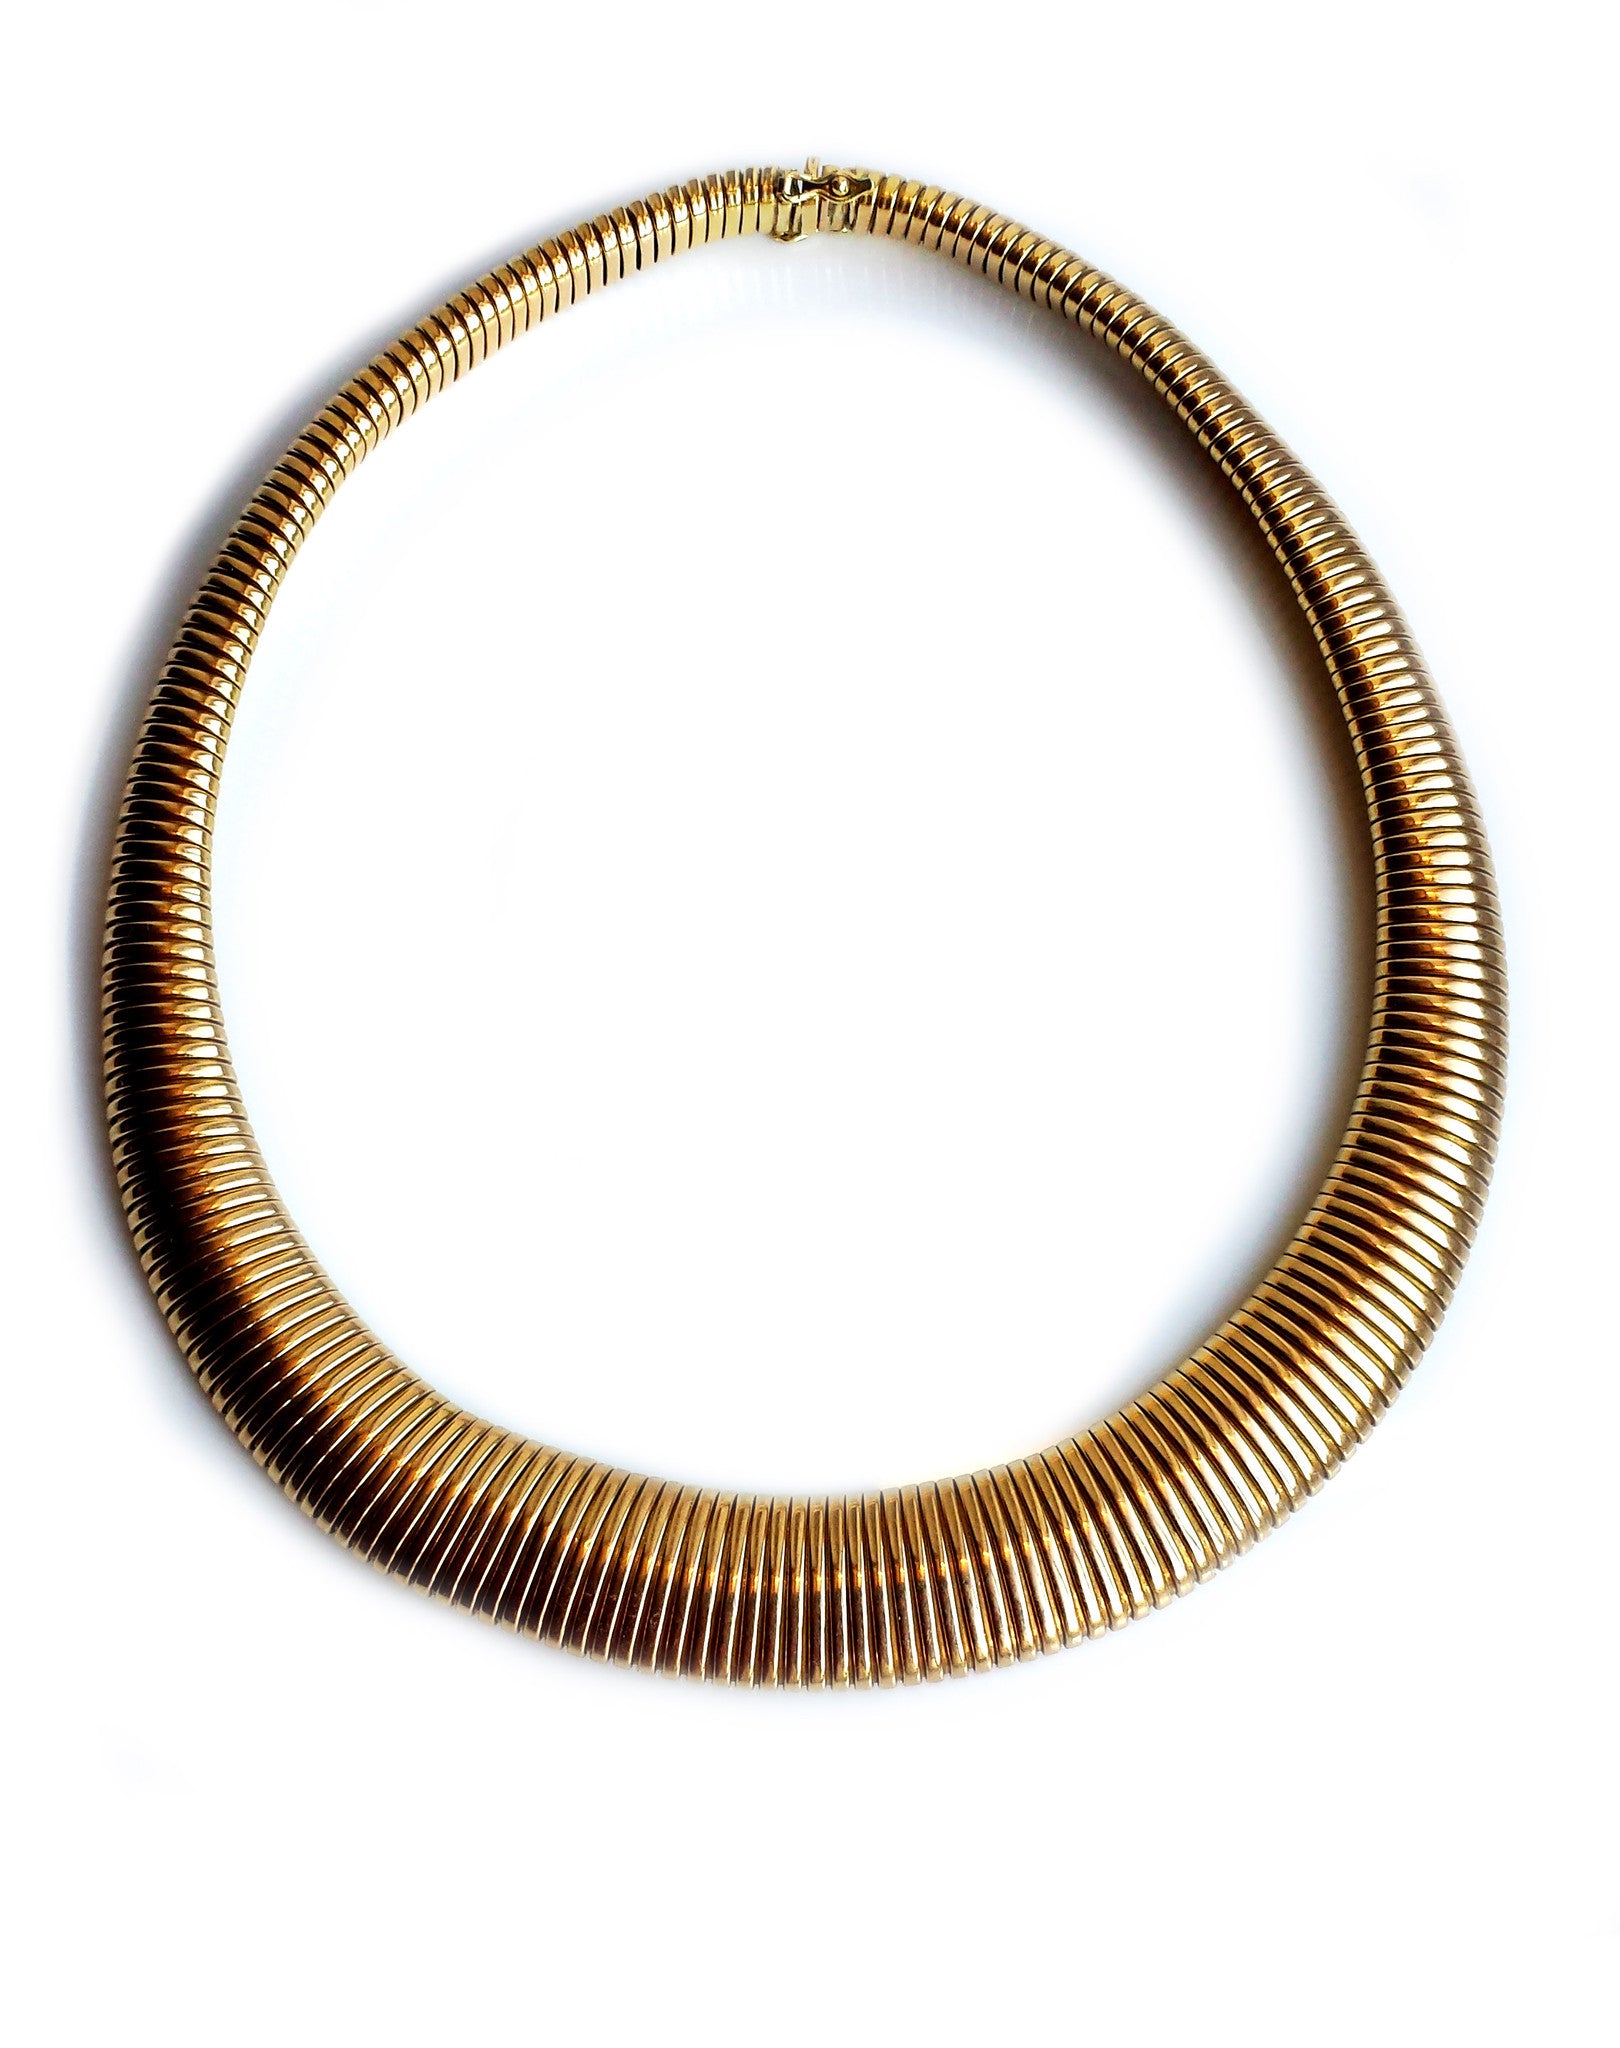 Vintage 1940s French 18k Gold Tubogaz Necklace Choker 16 inches